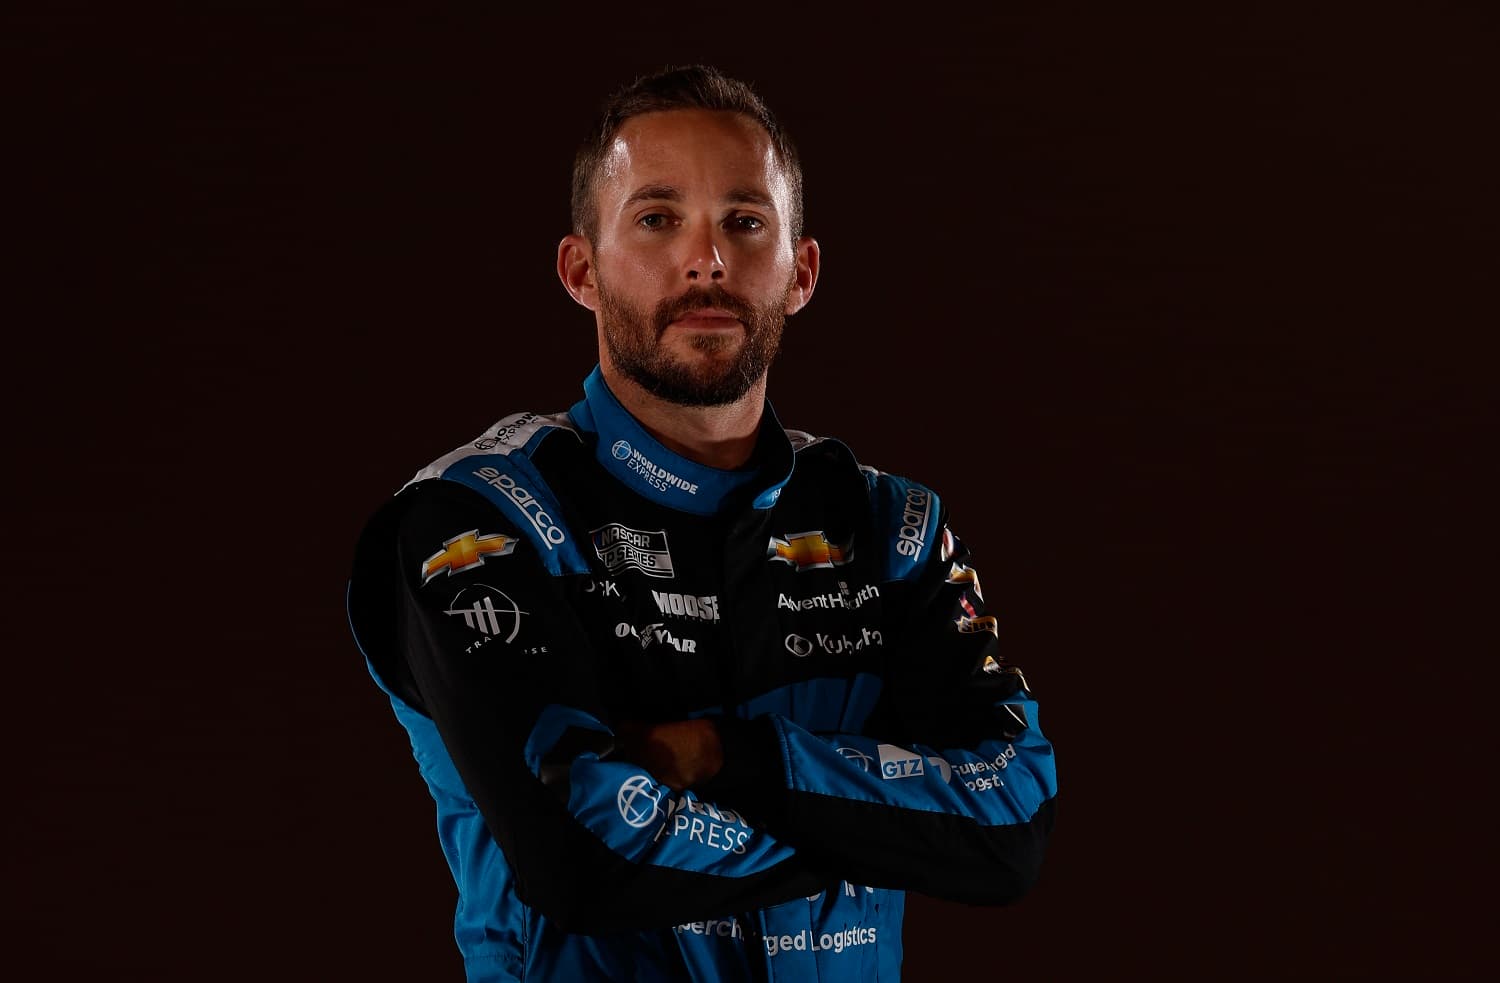 NASCAR driver Ross Chastain during NASCAR Production Days at Charlotte Convention Center on Jan. 18, 2023. | Chris Graythen/Getty Images